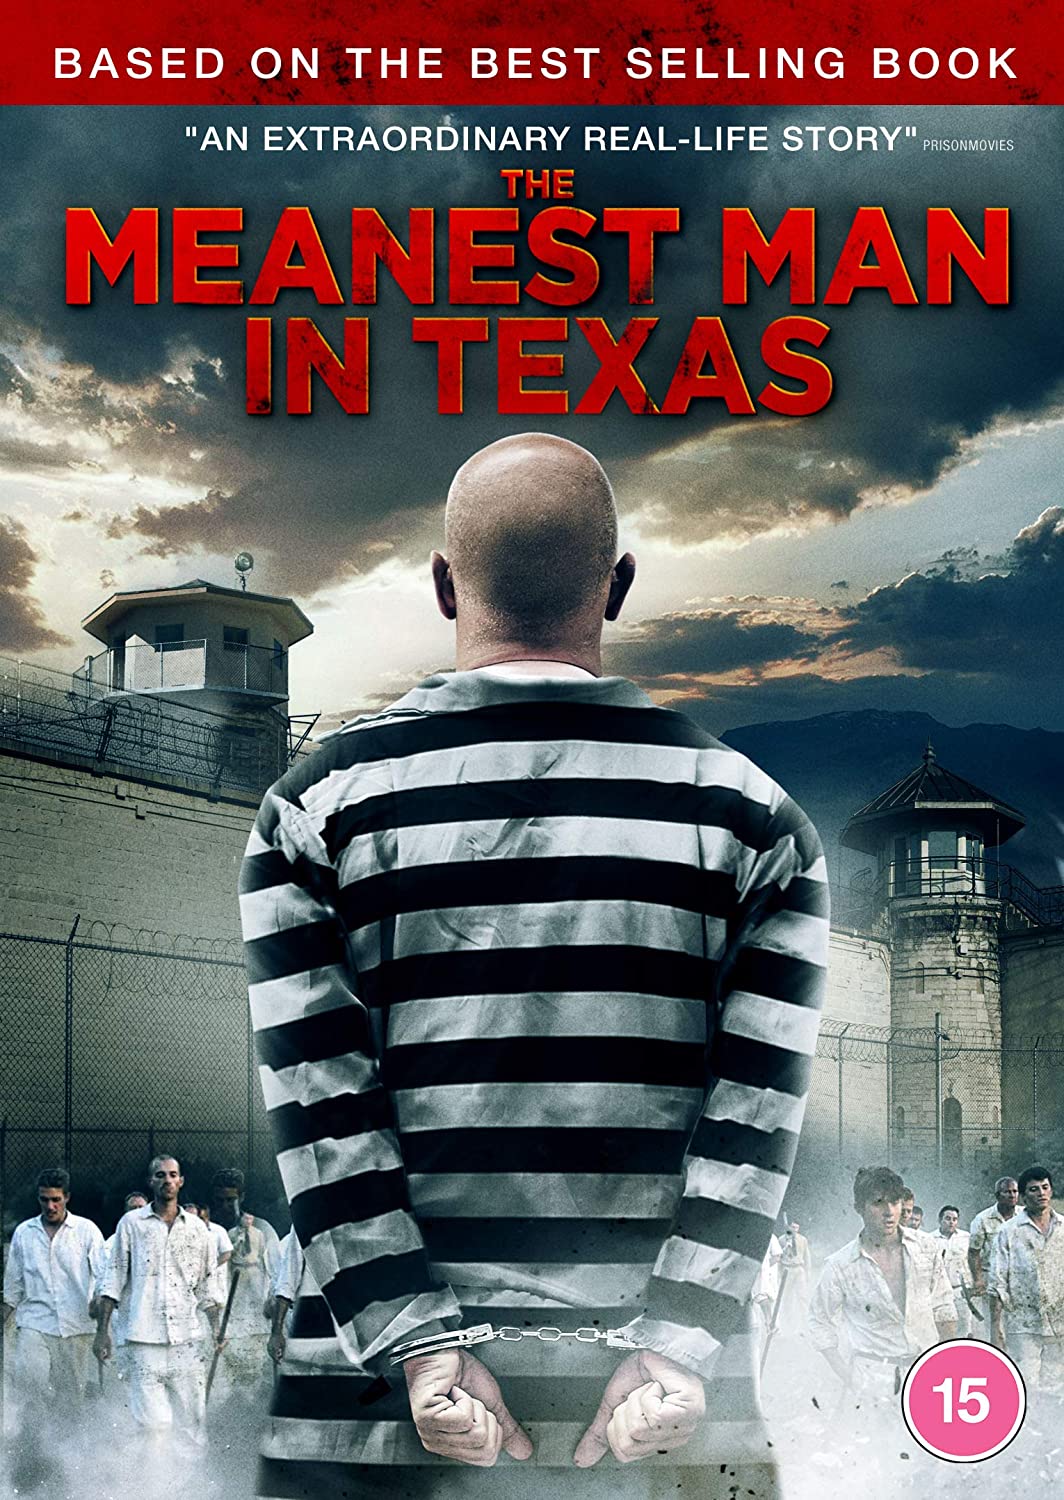 The Meanest Man In Texas - Drama [DVD]